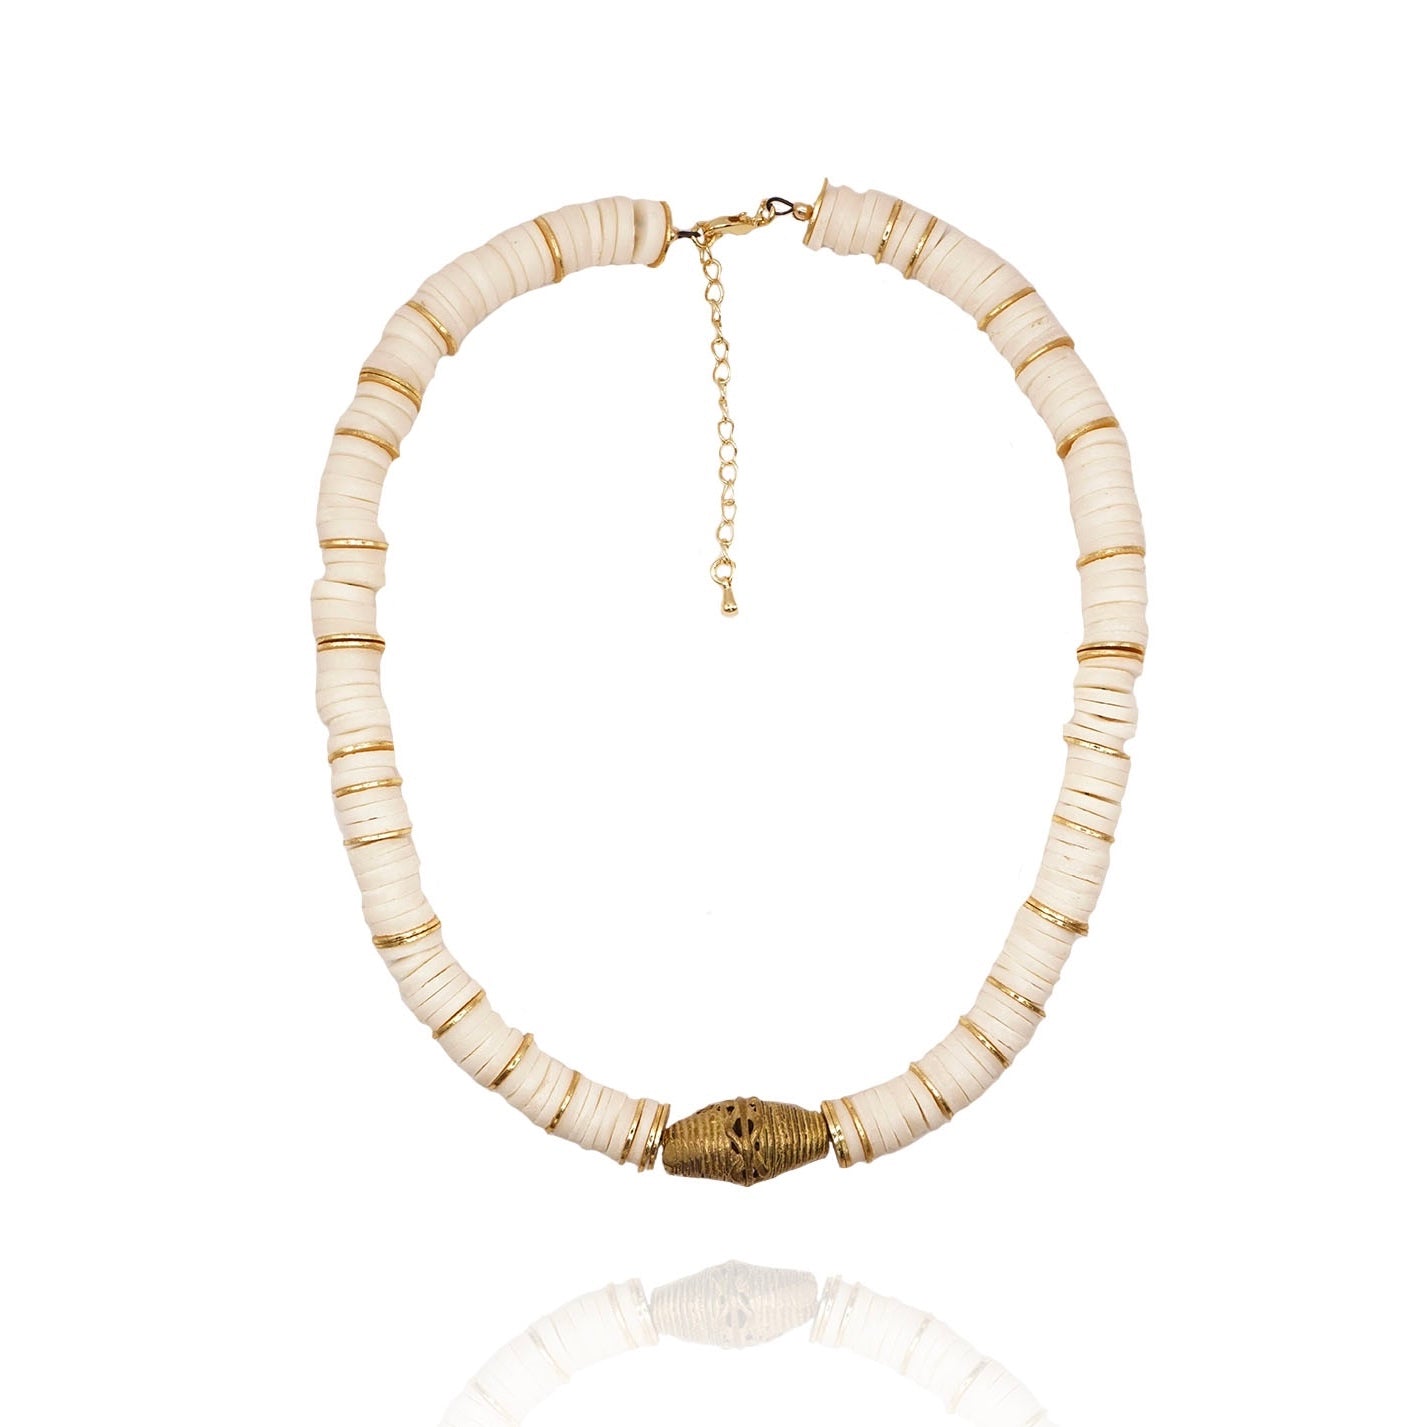 Shell bead necklace with gold spacers and a brass pendant